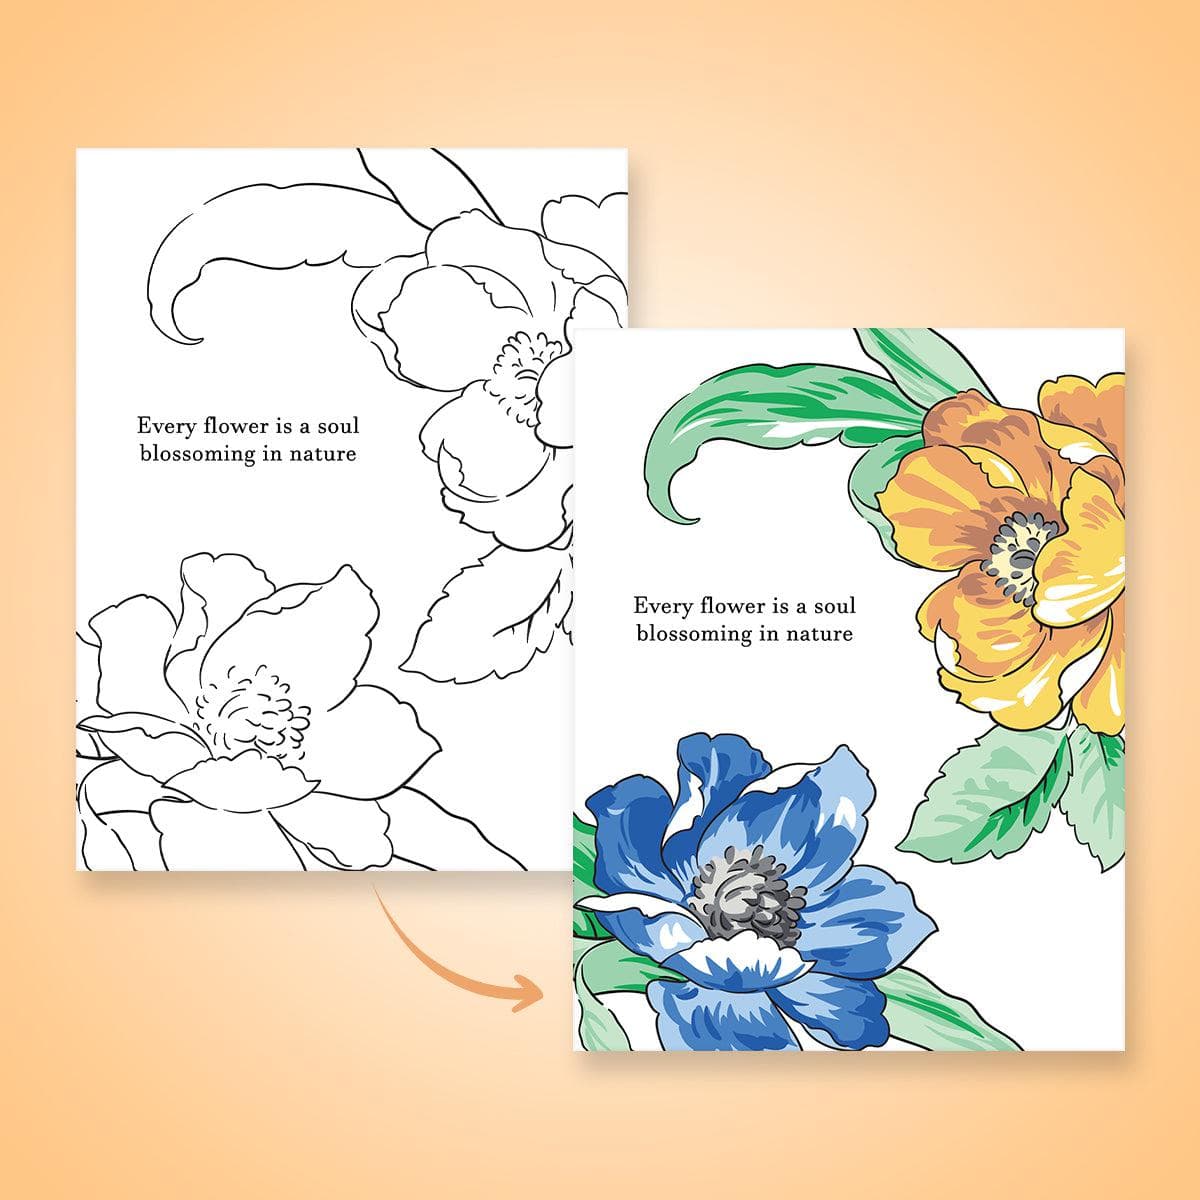 Colorful Blossoms (FREE Coloring Pages)